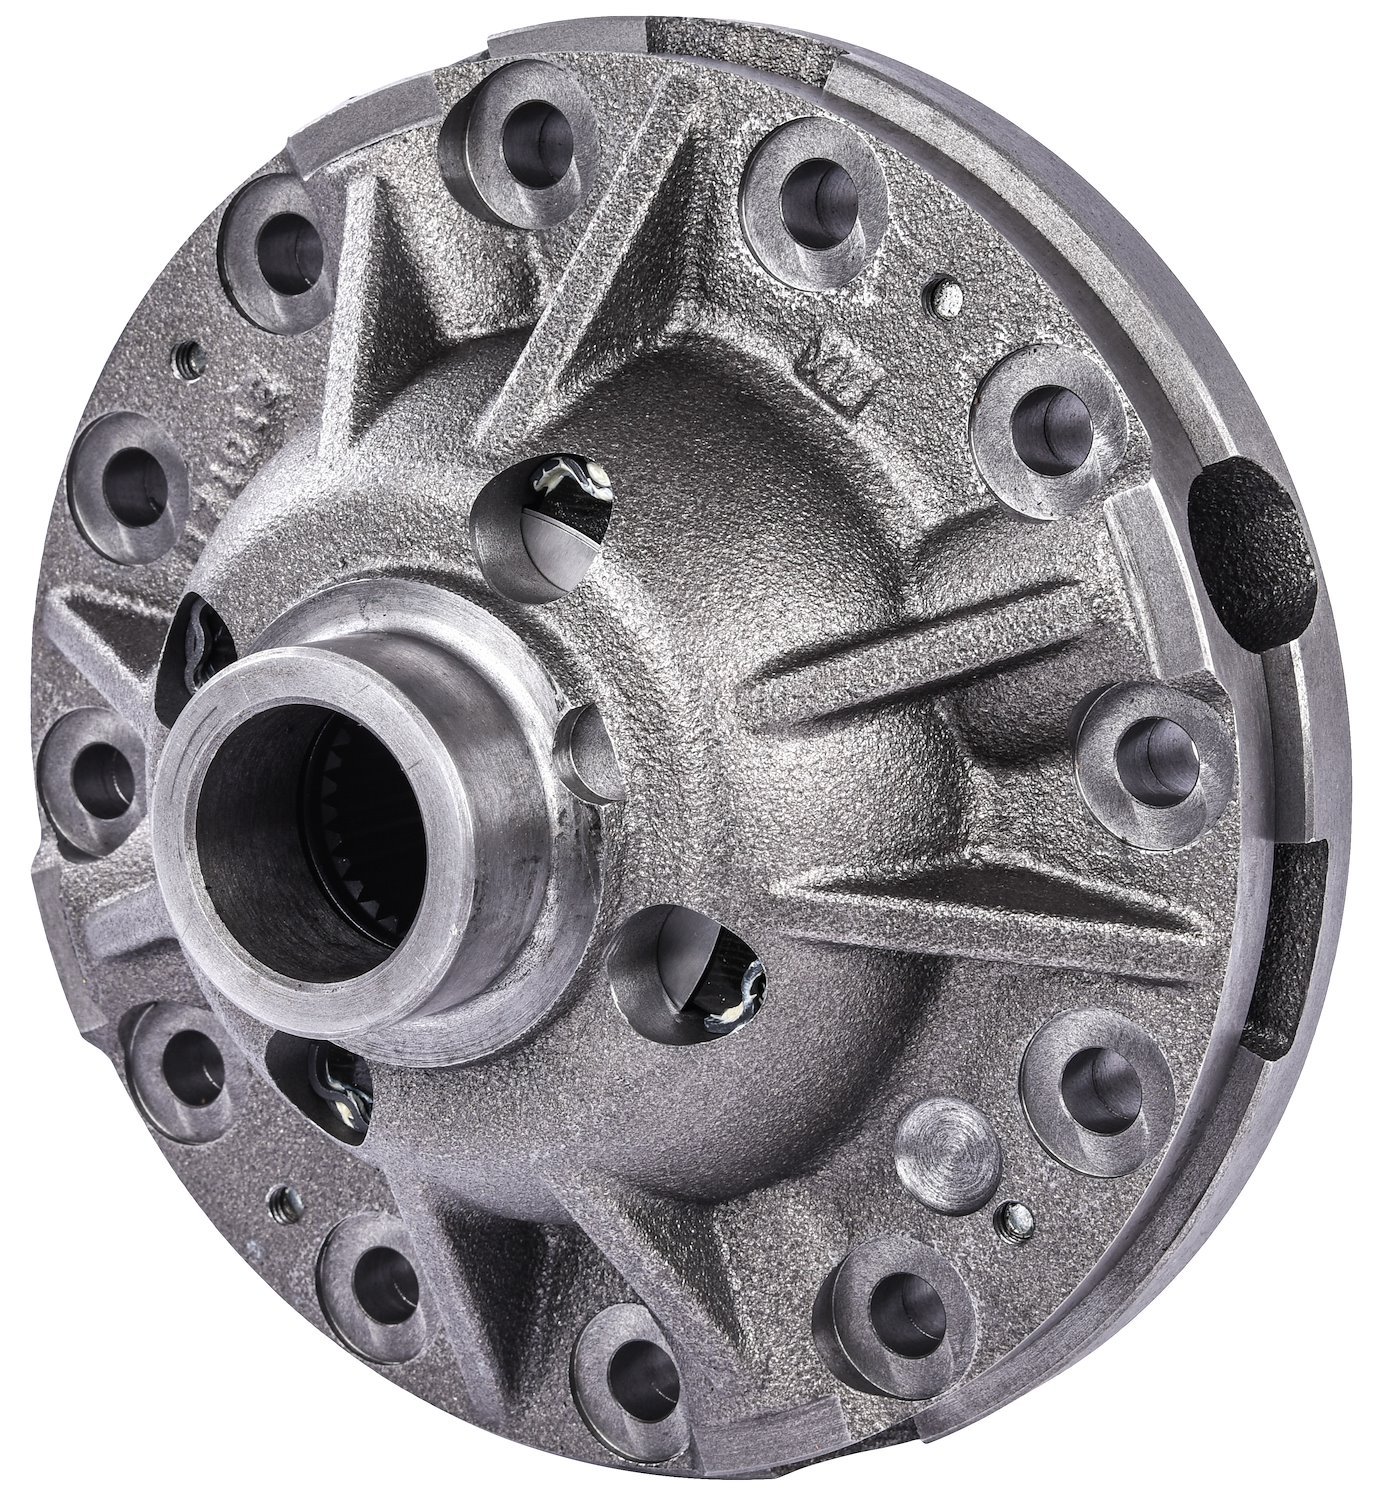 Posi Traction Differential for GM Truck 14-Bolt 10.5" Rear, 30-Spline [4.10 & Down Ratio]